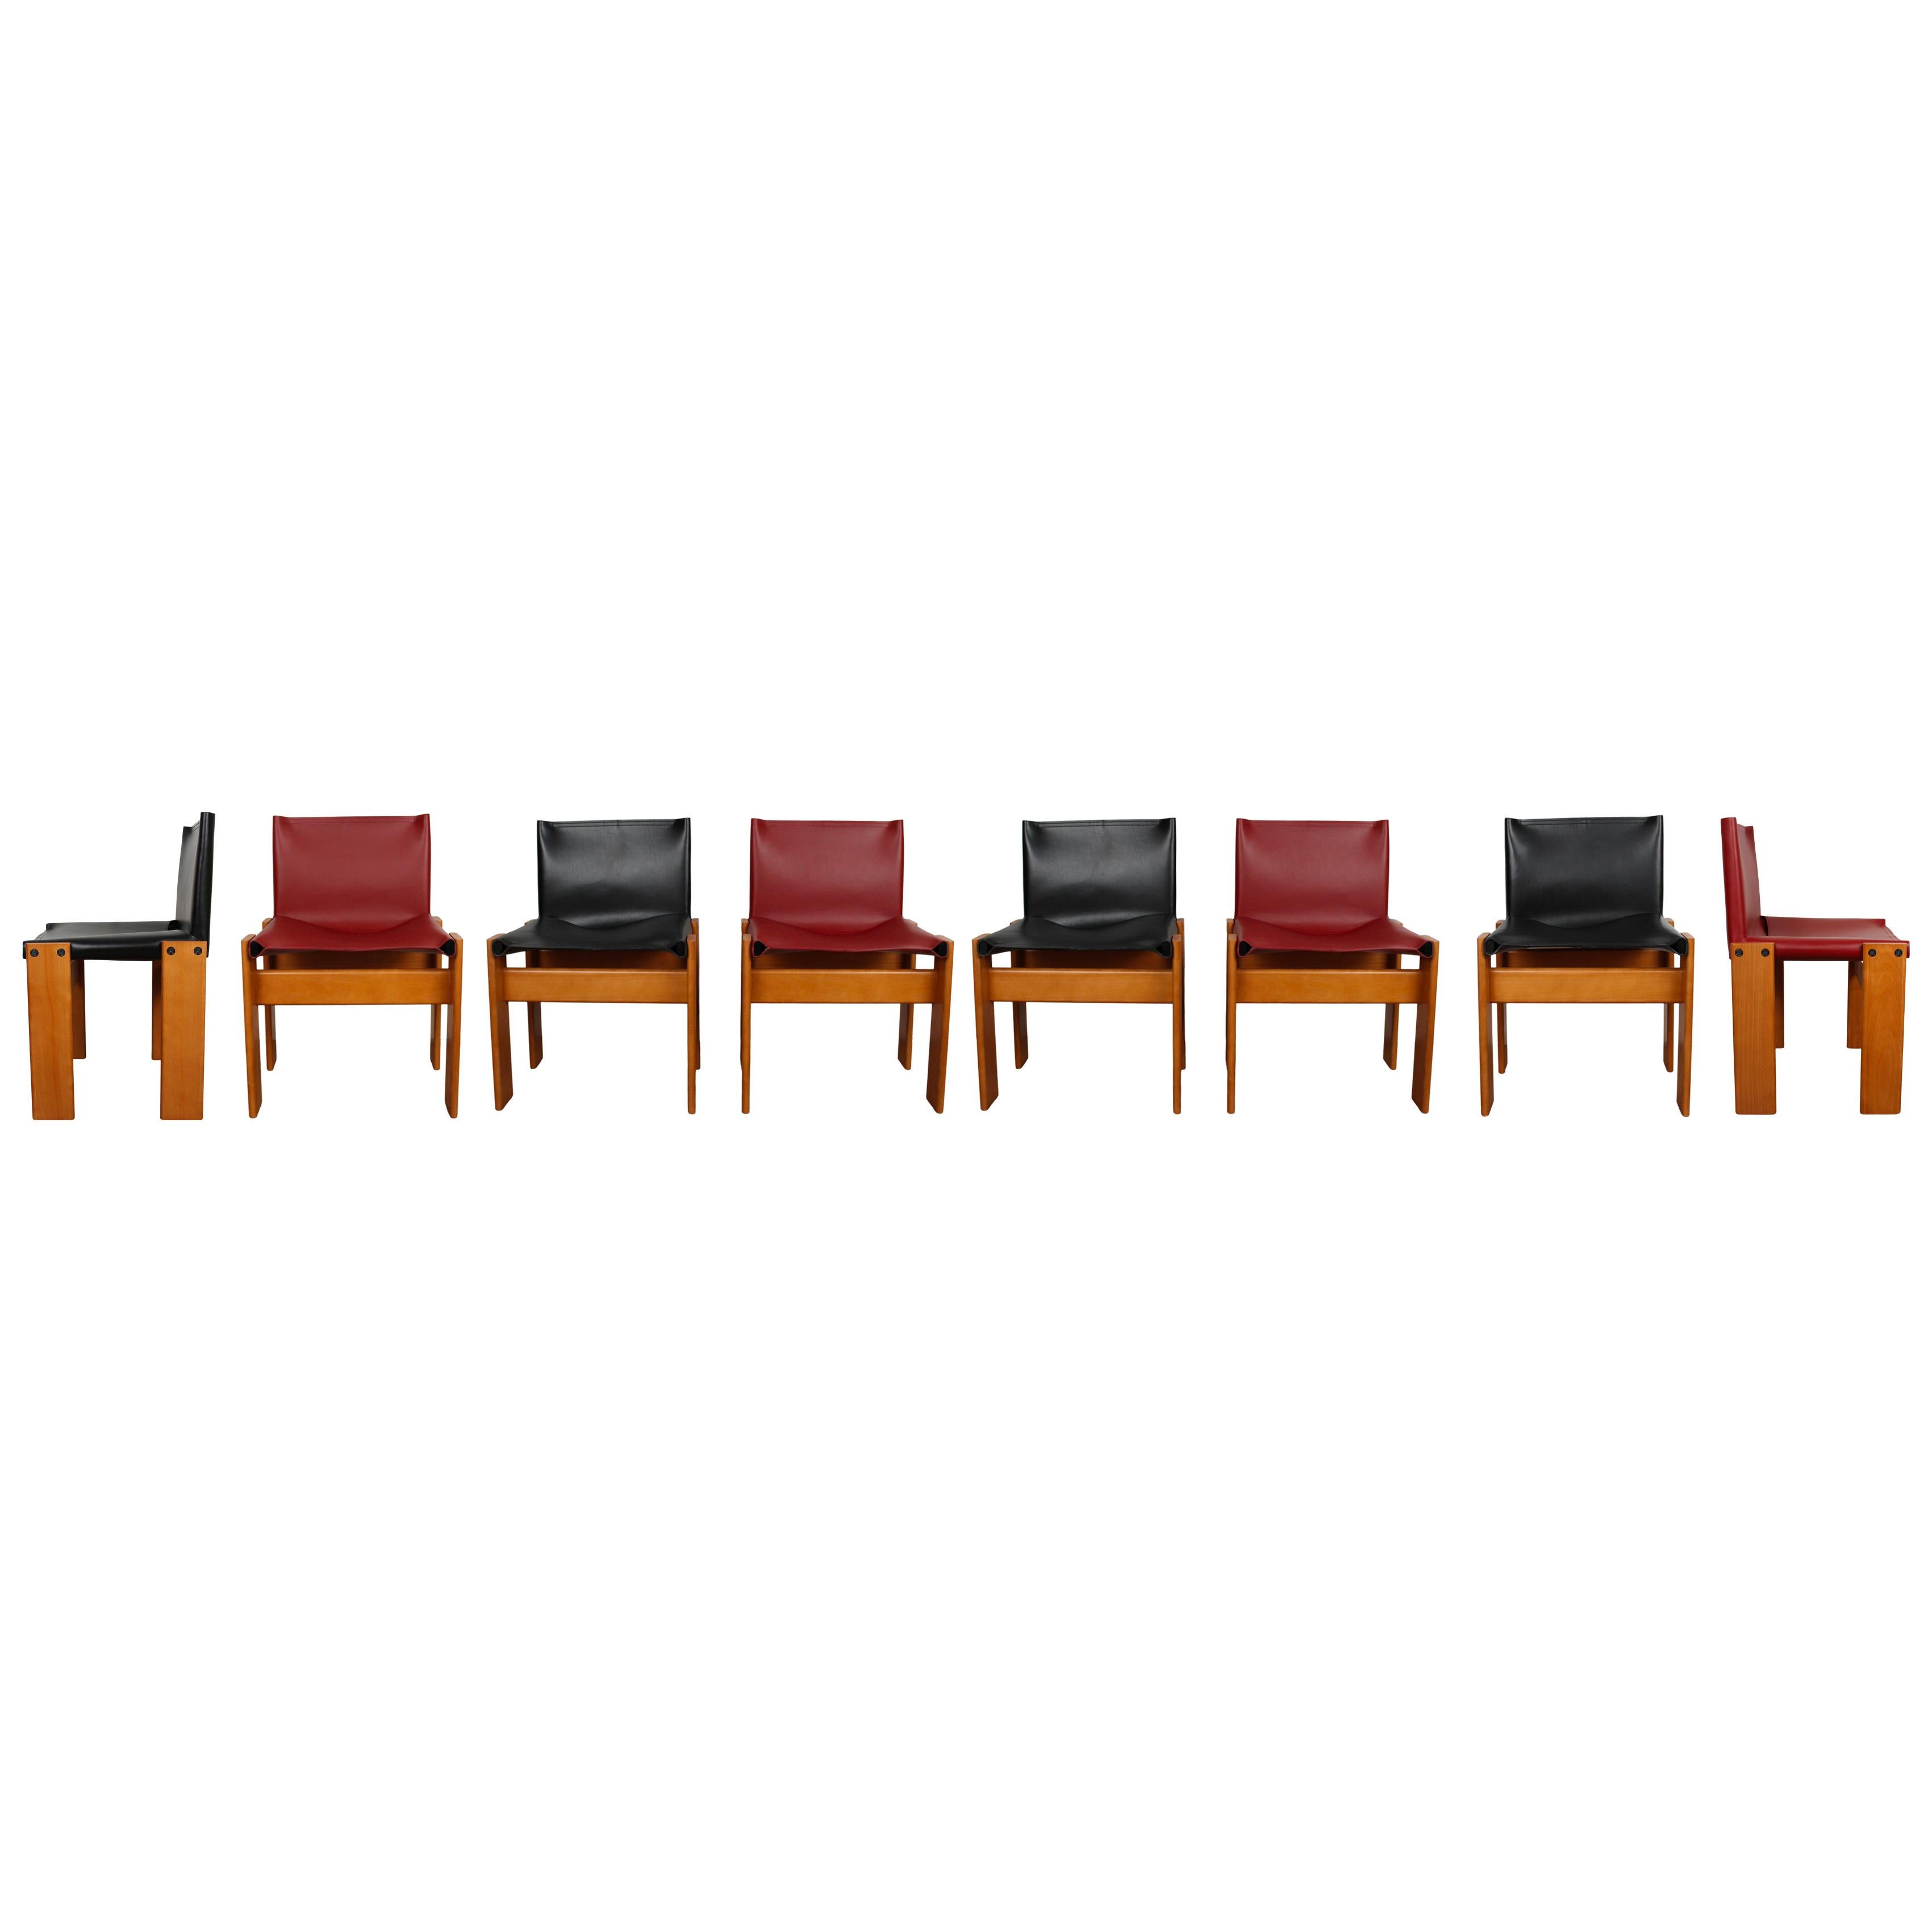 Italian Afra & Tobia Scarpa Black & Red Leather Monk Dining Chair for Molteni, Set of 8 For Sale